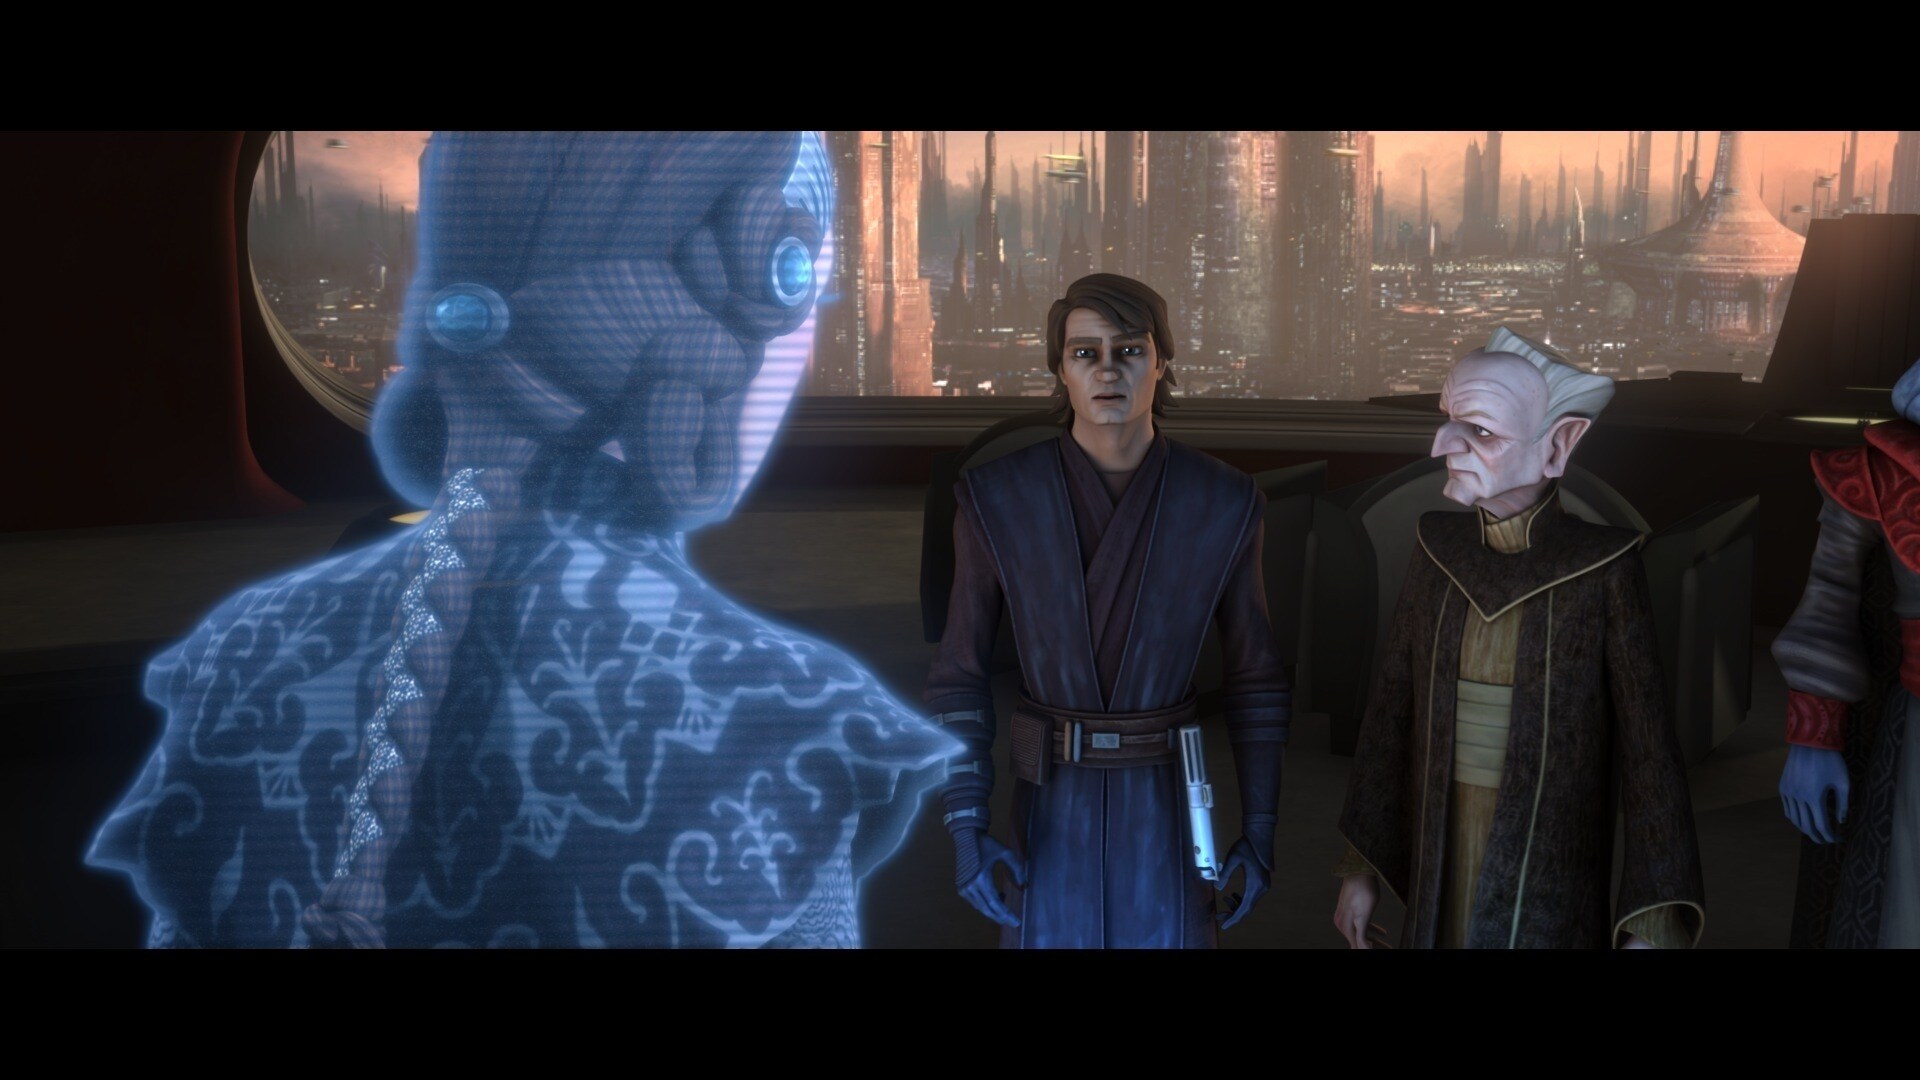 In Palpatine's office, Anakin, the Chancellor, and Mas Amedda watch a holographic broadcast from ...